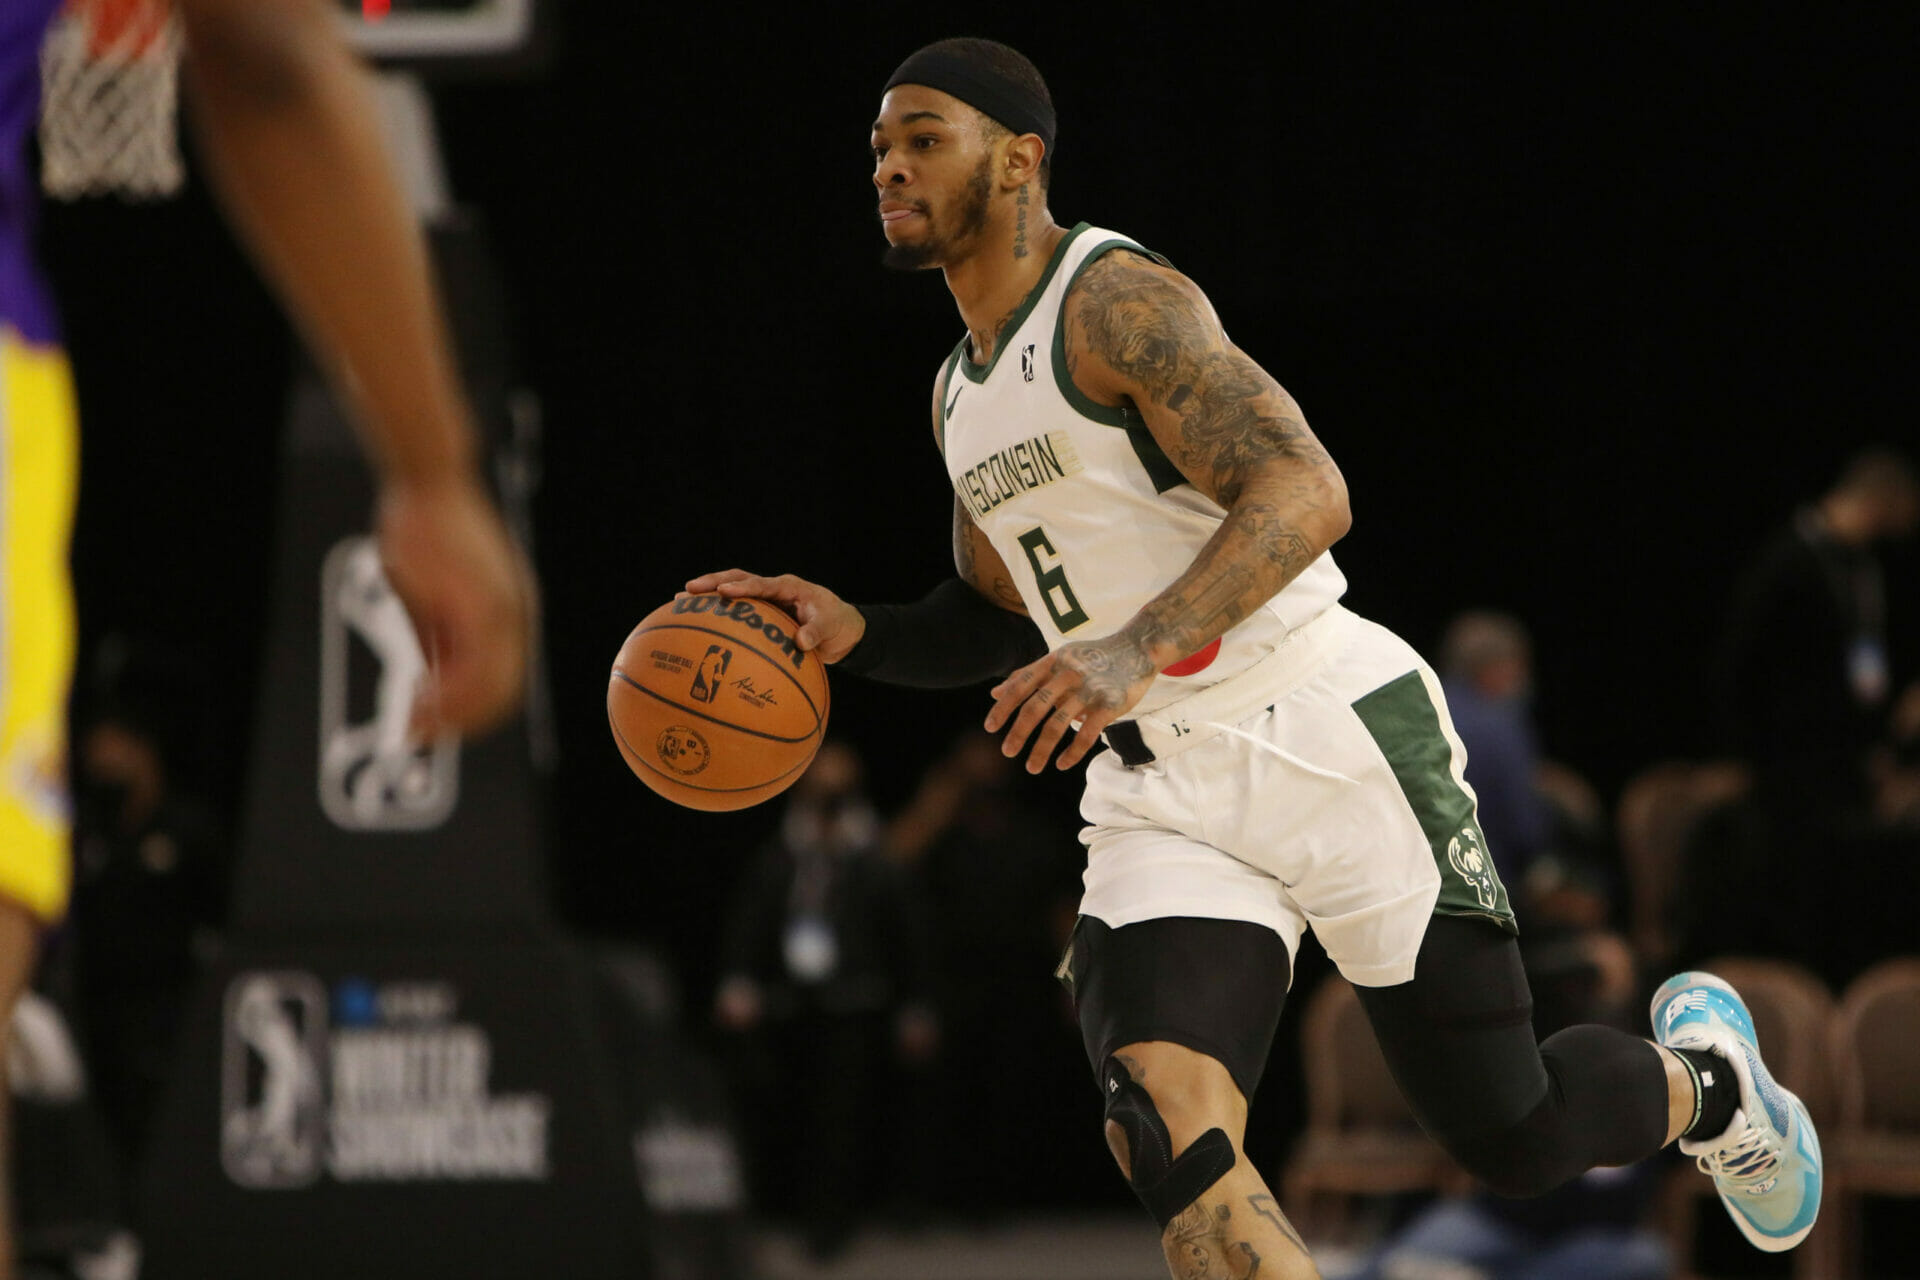 G League president impressed with Herd - The Advance-Titan